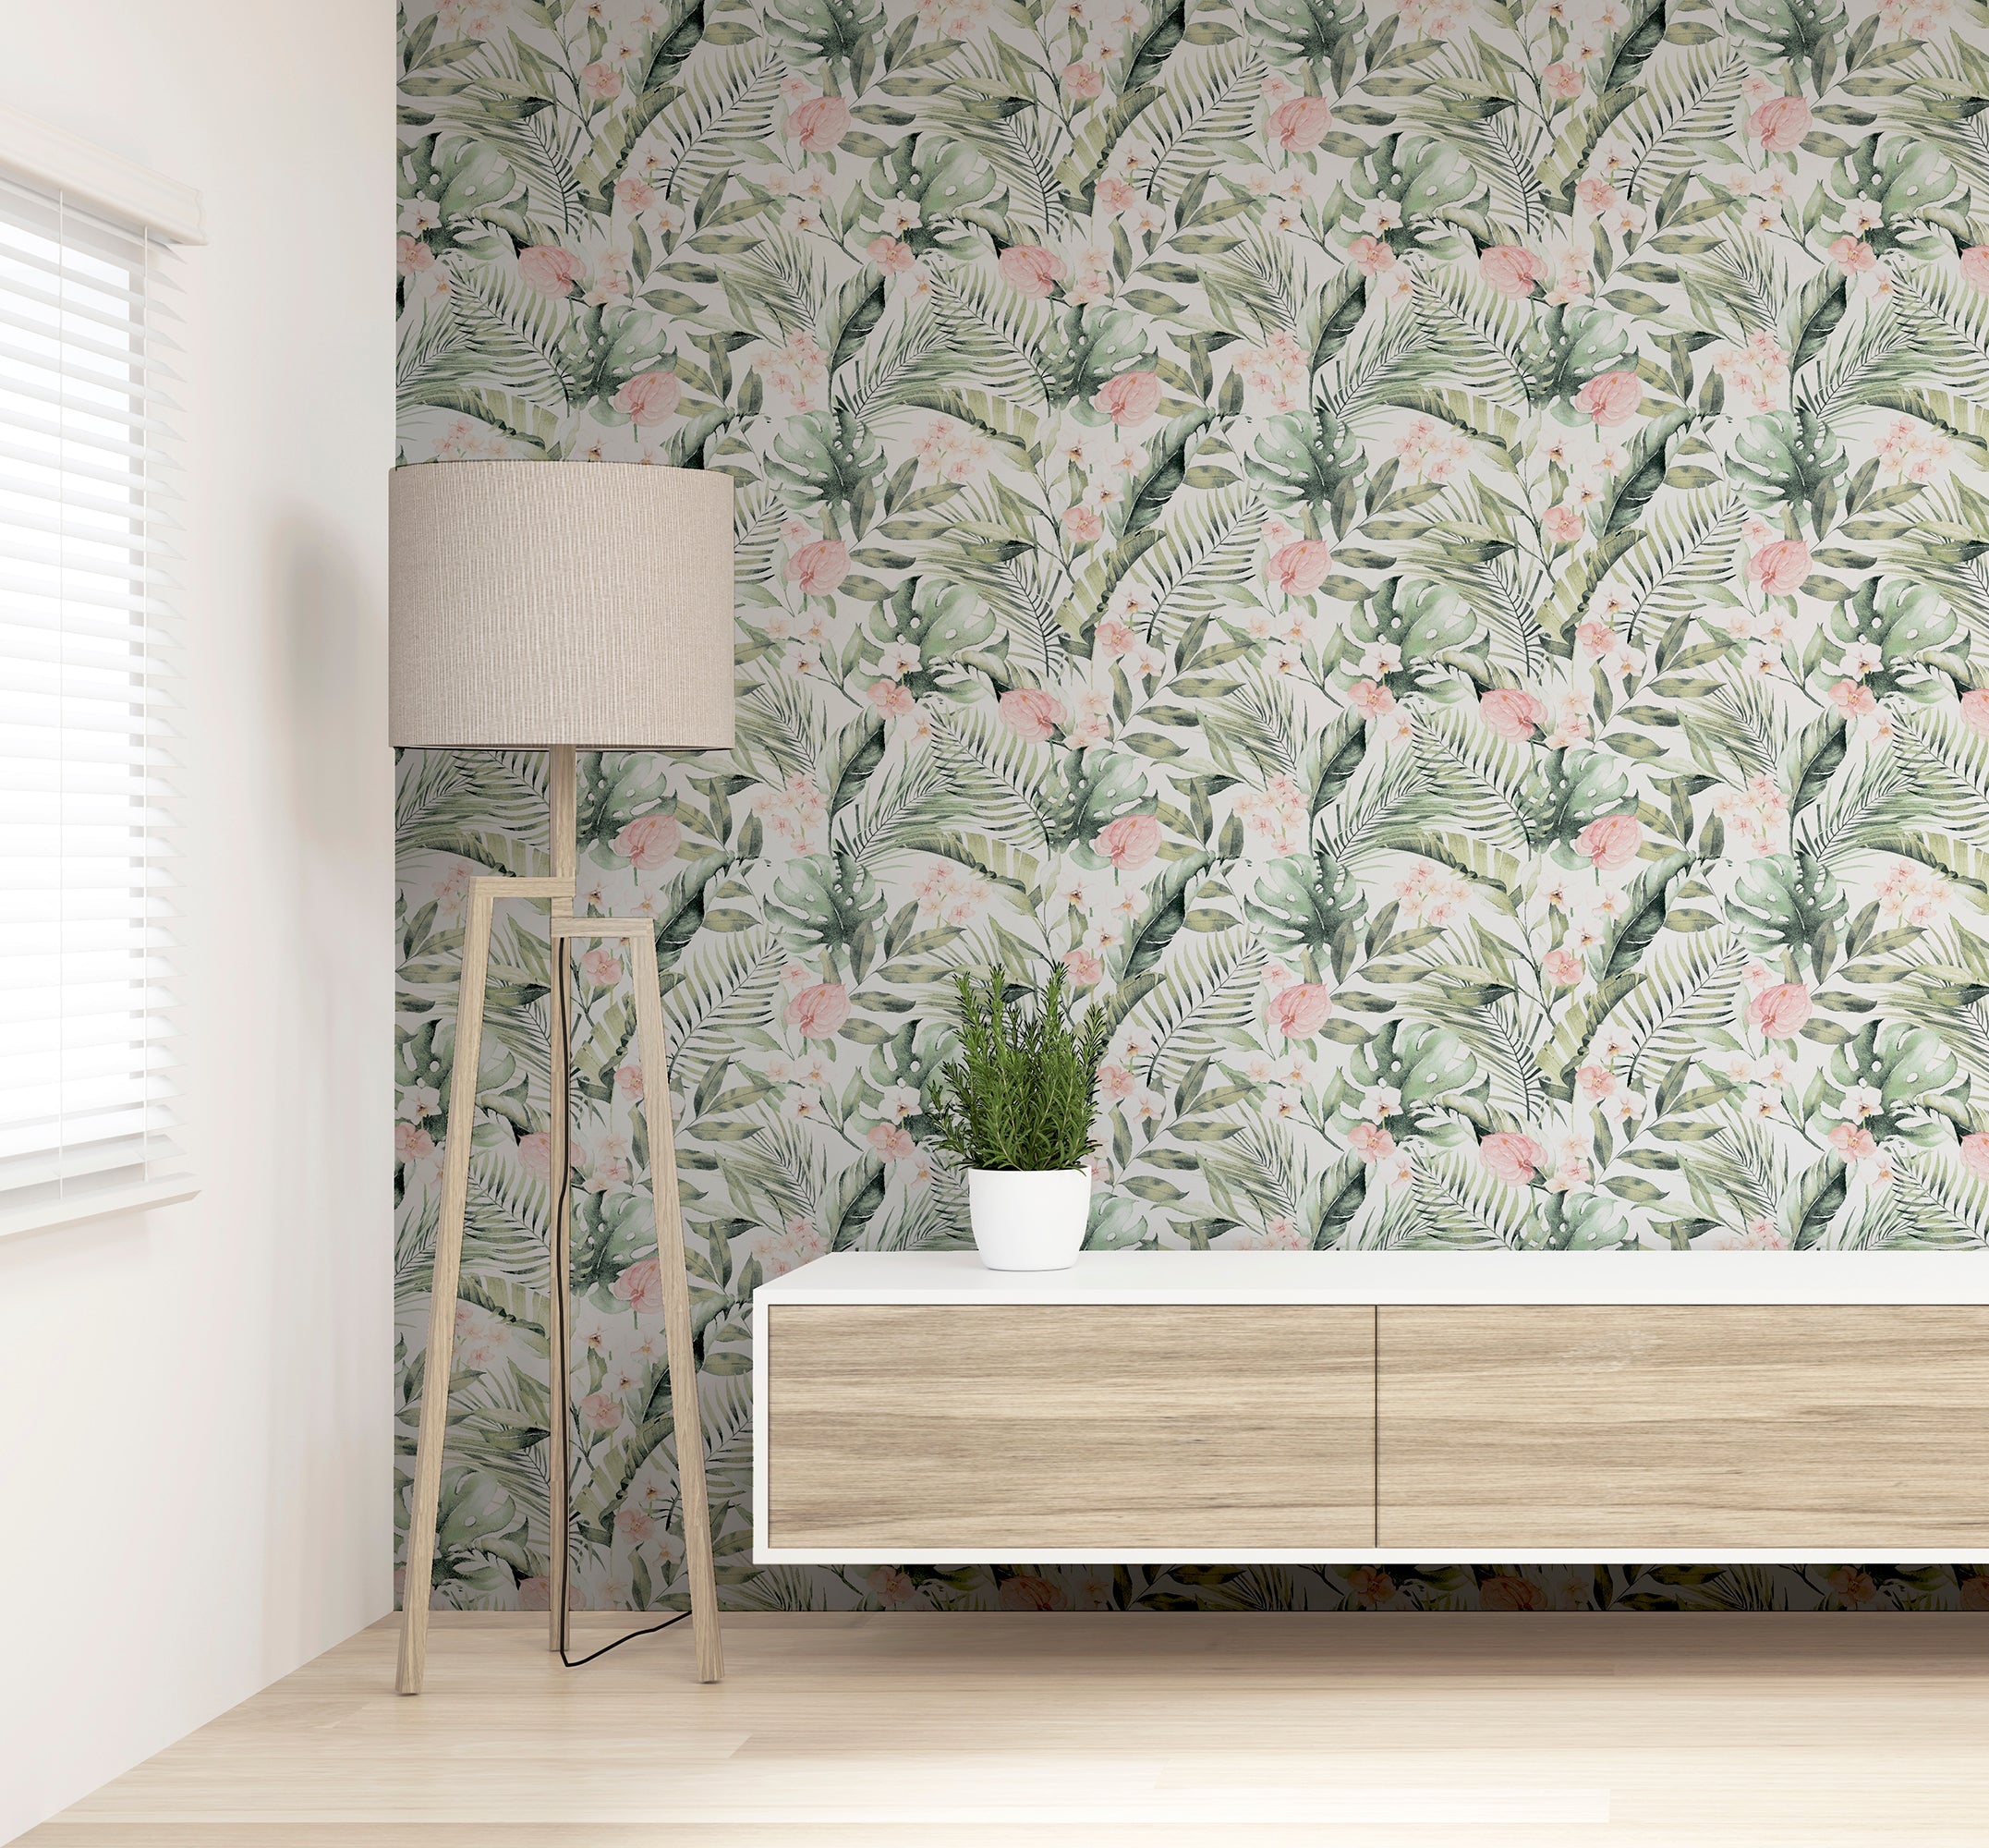 Buy 13 Feet Kepler Inspired Chinoiserie Floral Wallpaper at 8 OFF by  Design by Metamorph  Pepperfry